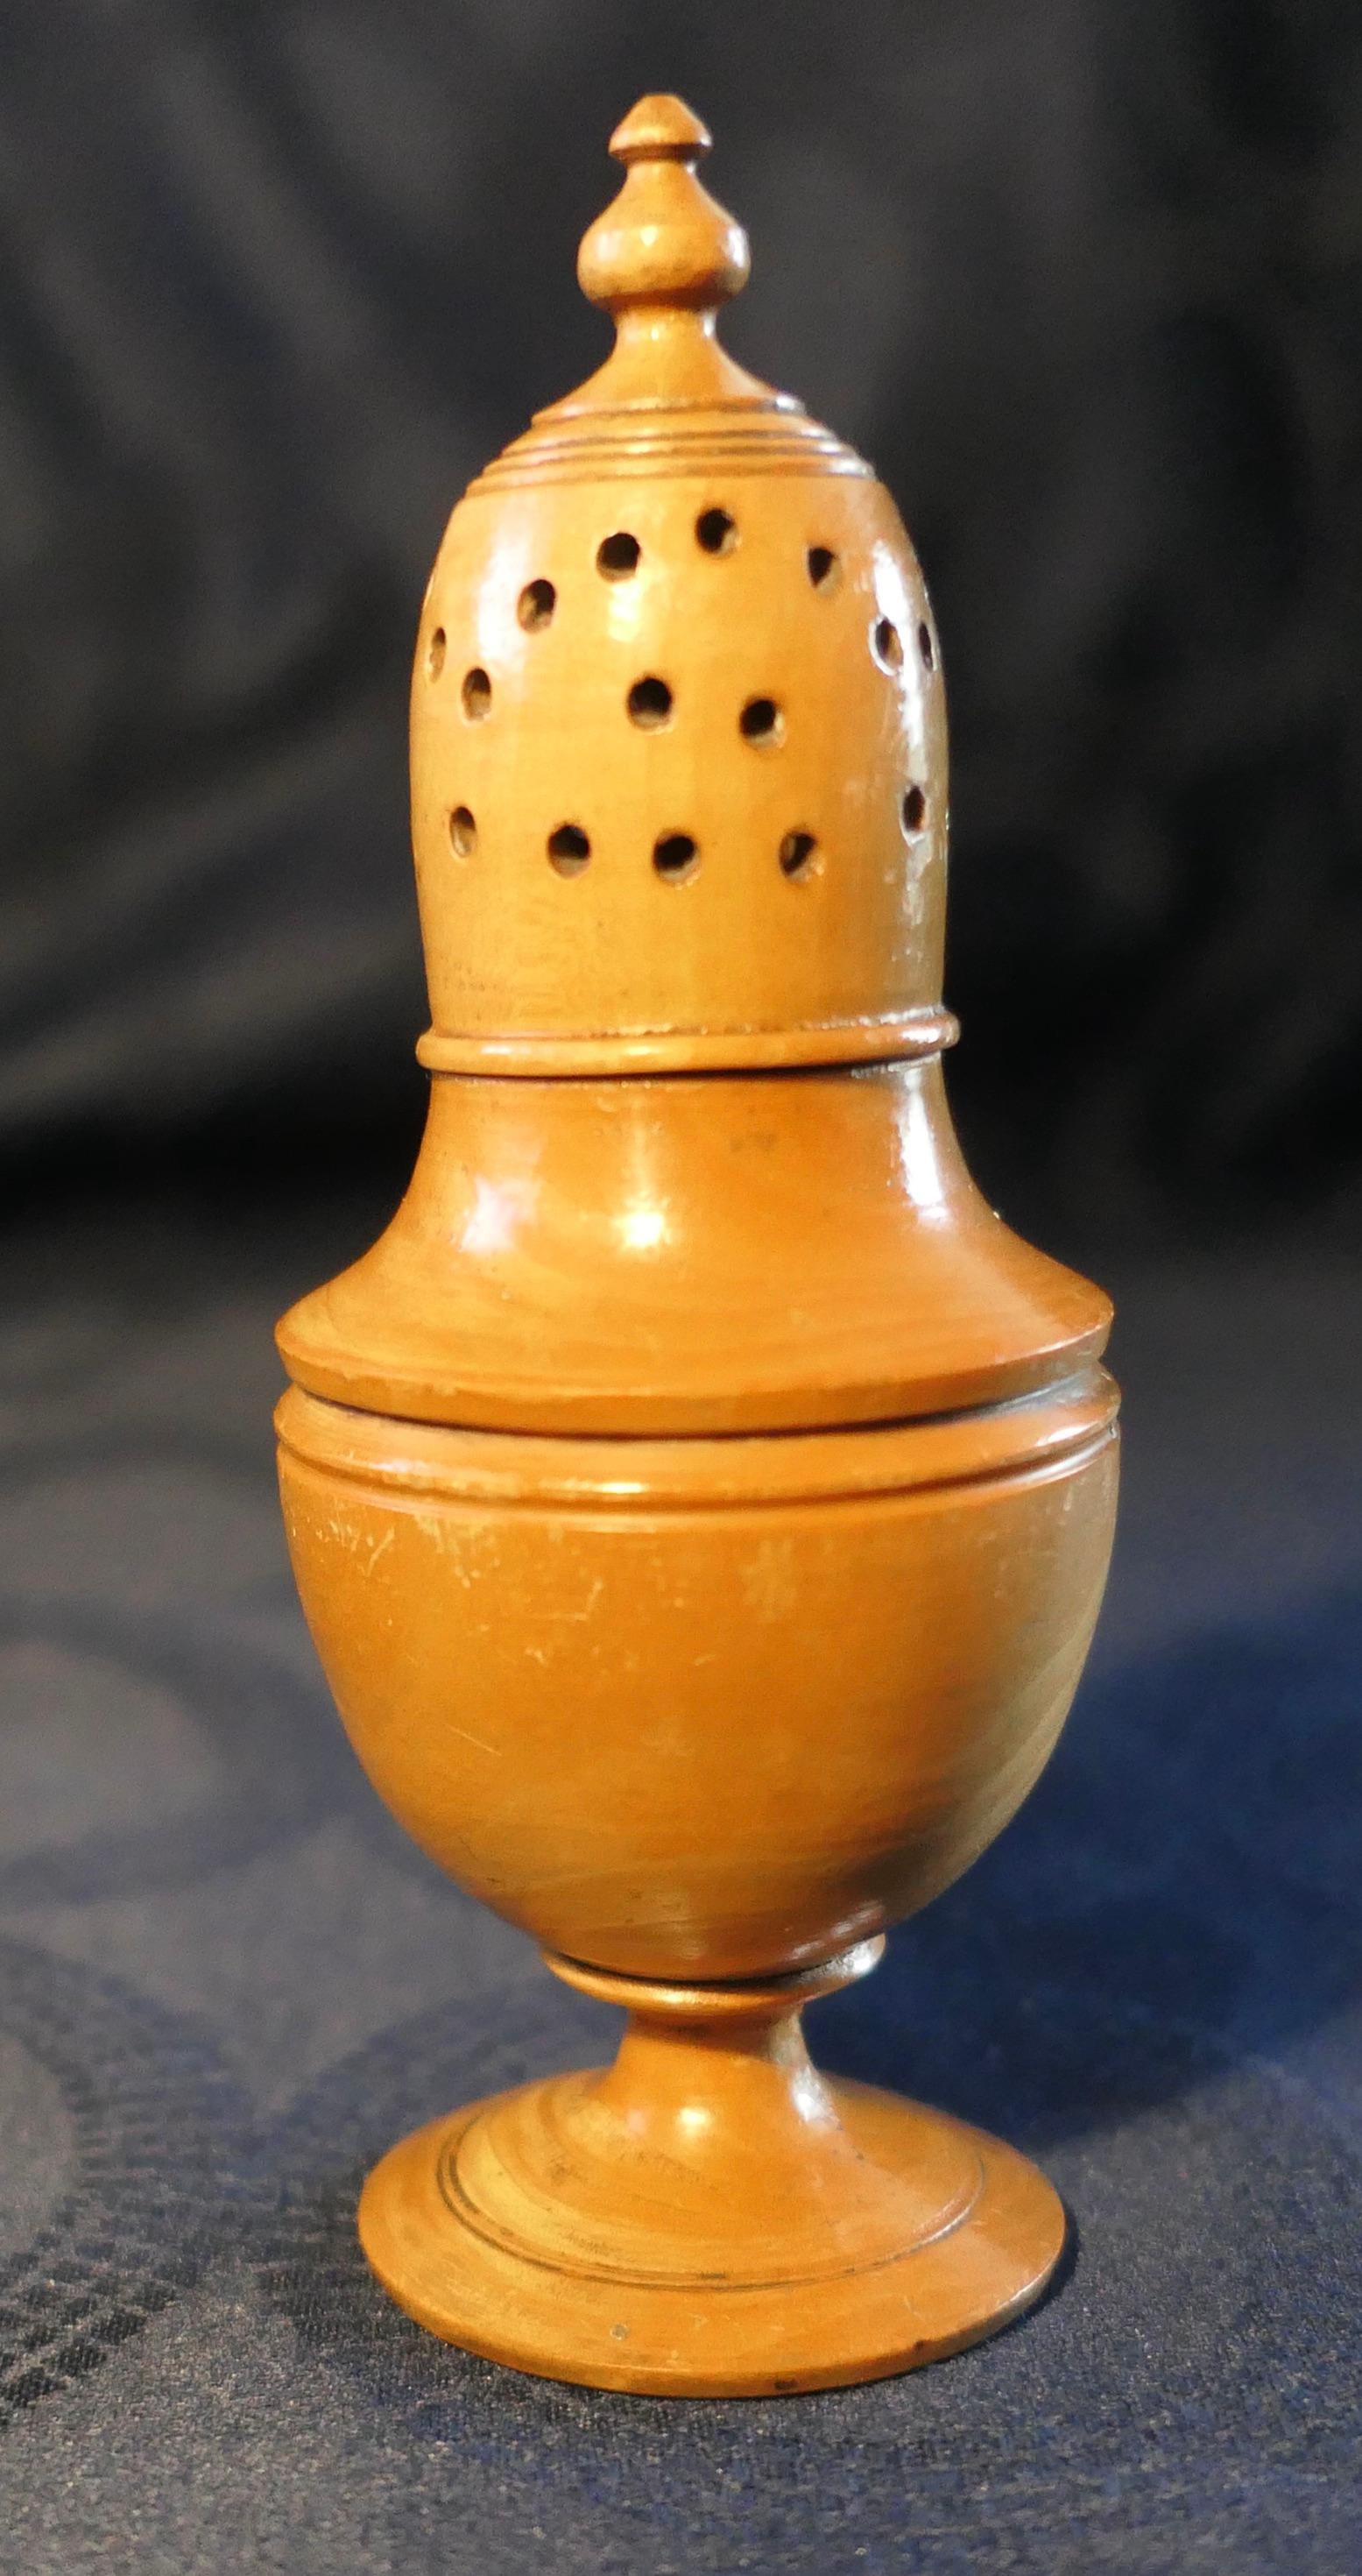 Early 19th Century Sycamore Muffineer, Sugar Shaker

This beautiful piece has been hand turned on a lathe, it comes into 2 parts so that it can be  filled with sugar or other spices 
The wood has a wonderful colour and patina
The muffineer is in